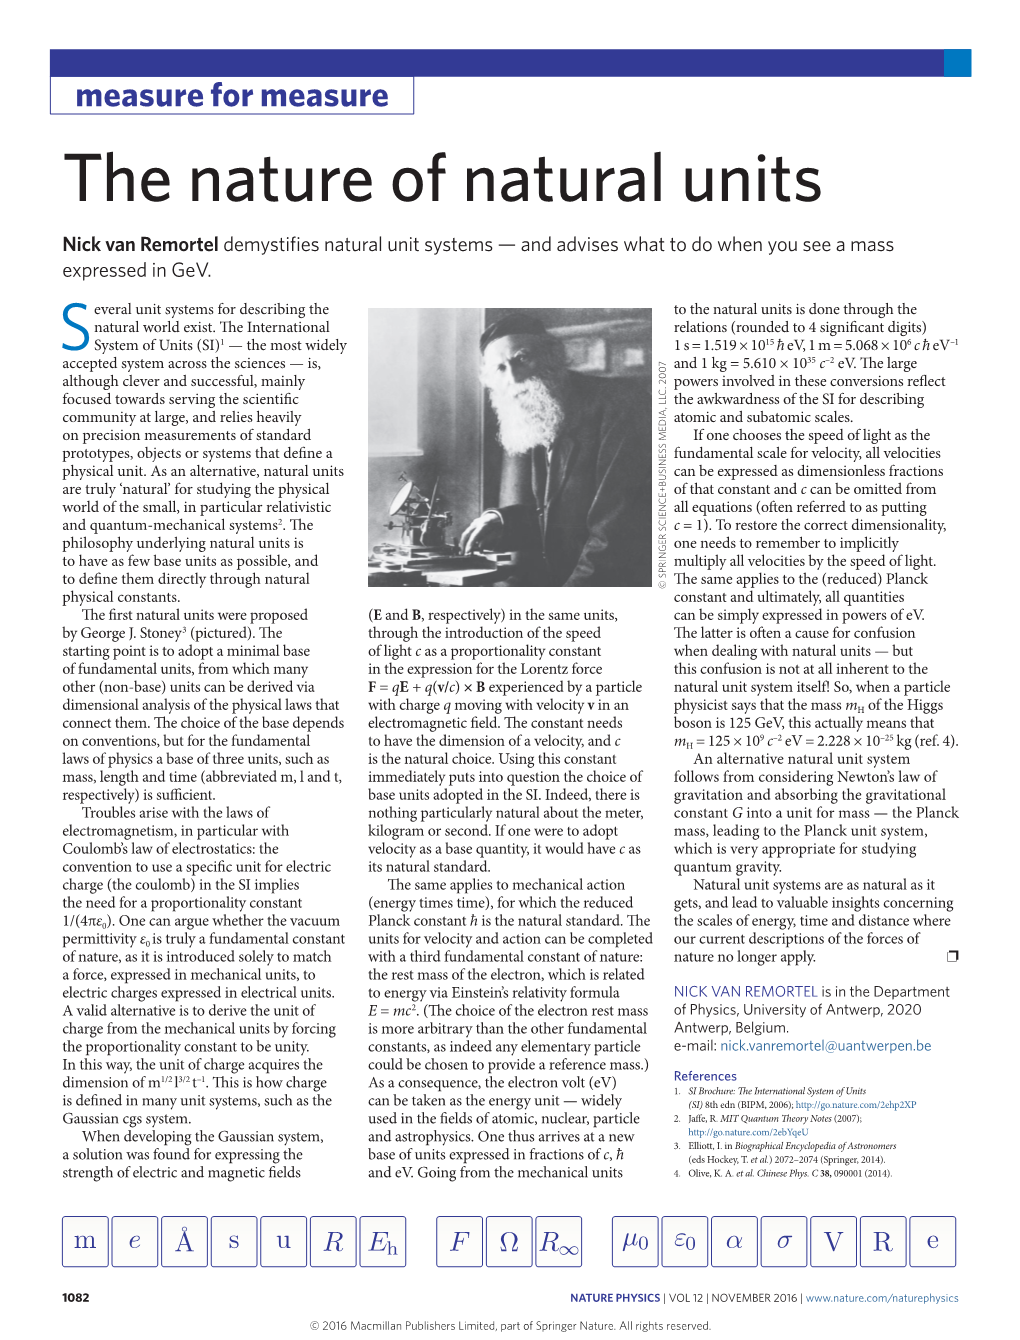 The Nature of Natural Units Nick Van Remortel Demystifies Natural Unit Systems — and Advises What to Do When You See a Mass Expressed in Gev